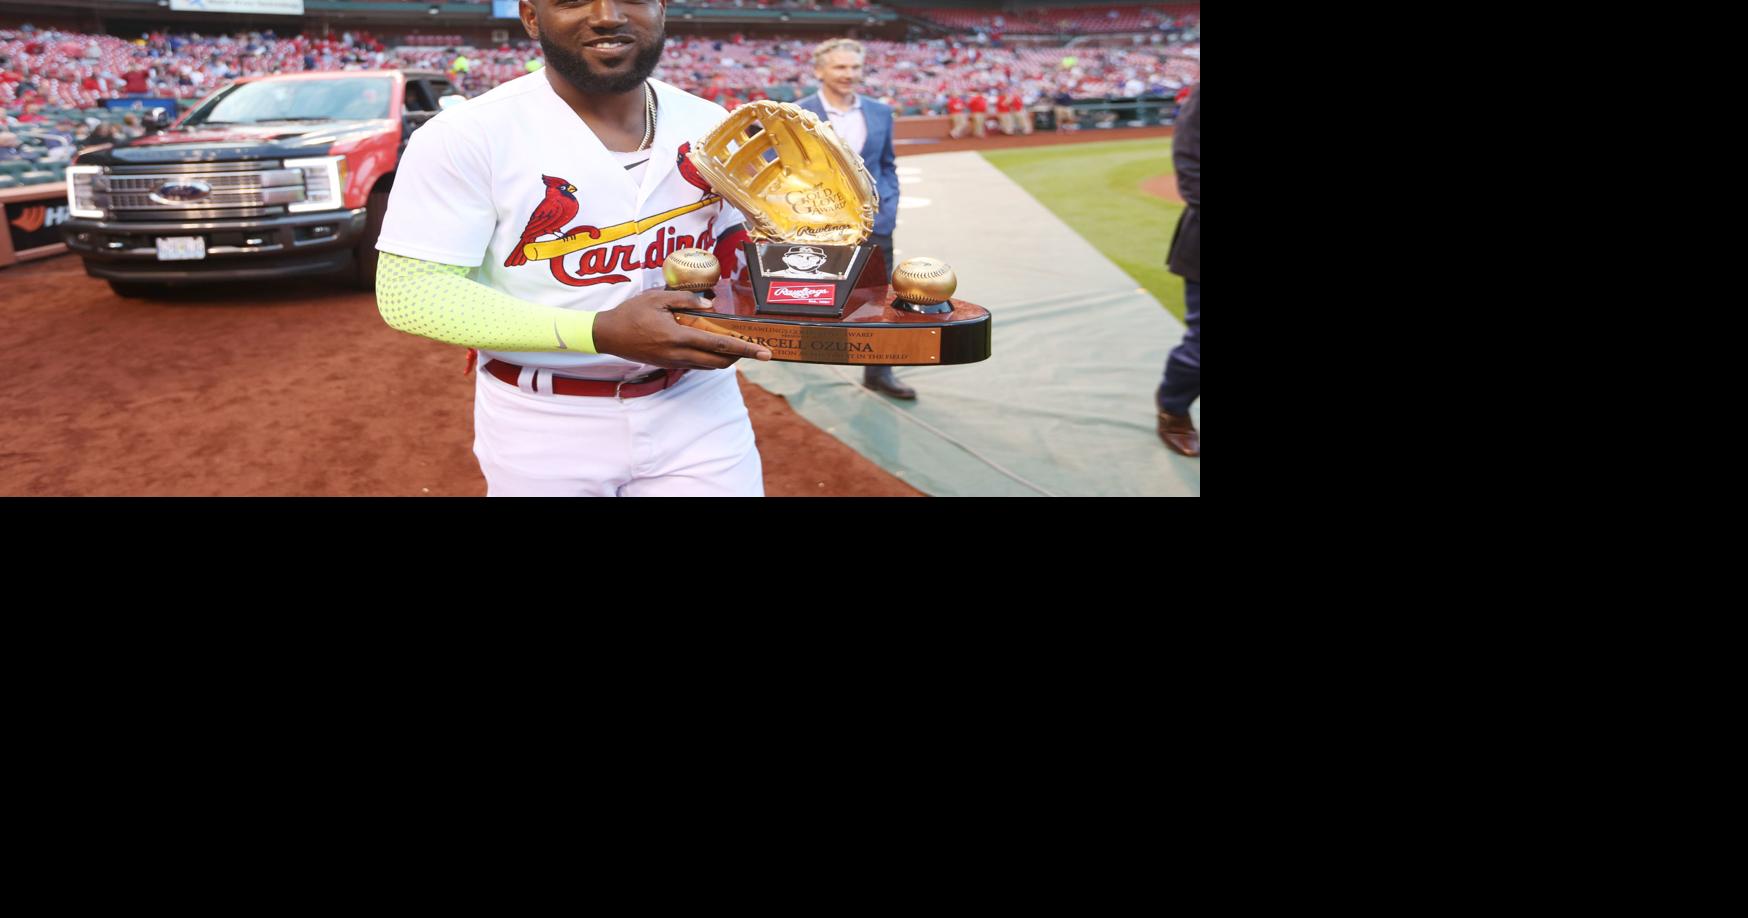 THAT'S NO GOLD GLOVE IN LEFT FIELD